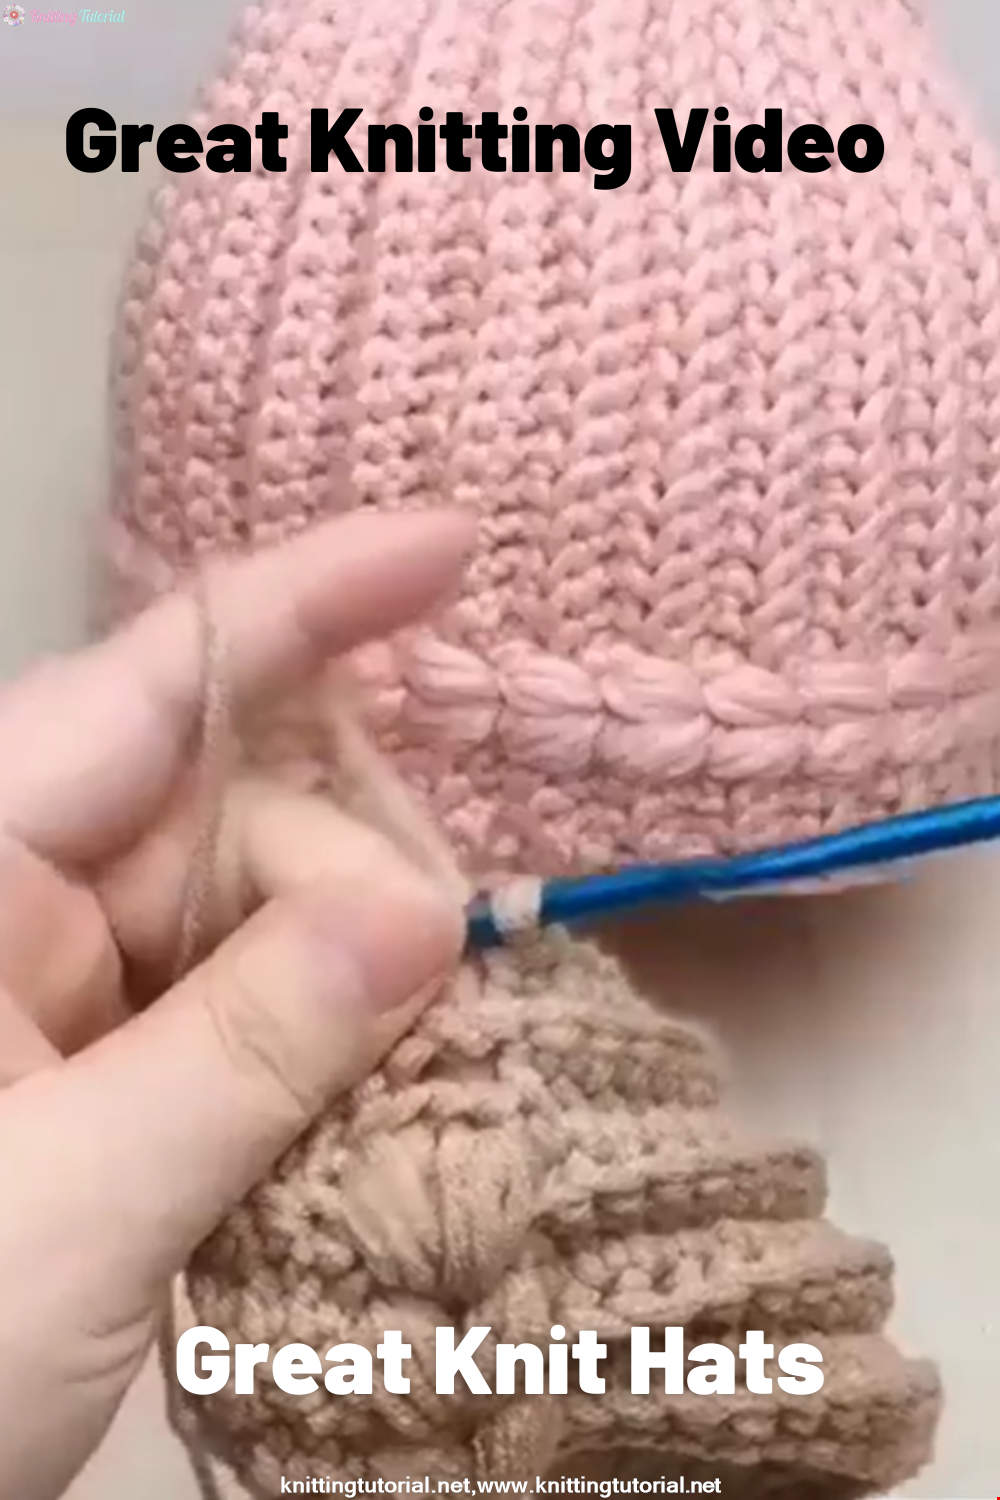 Great Knit Hats